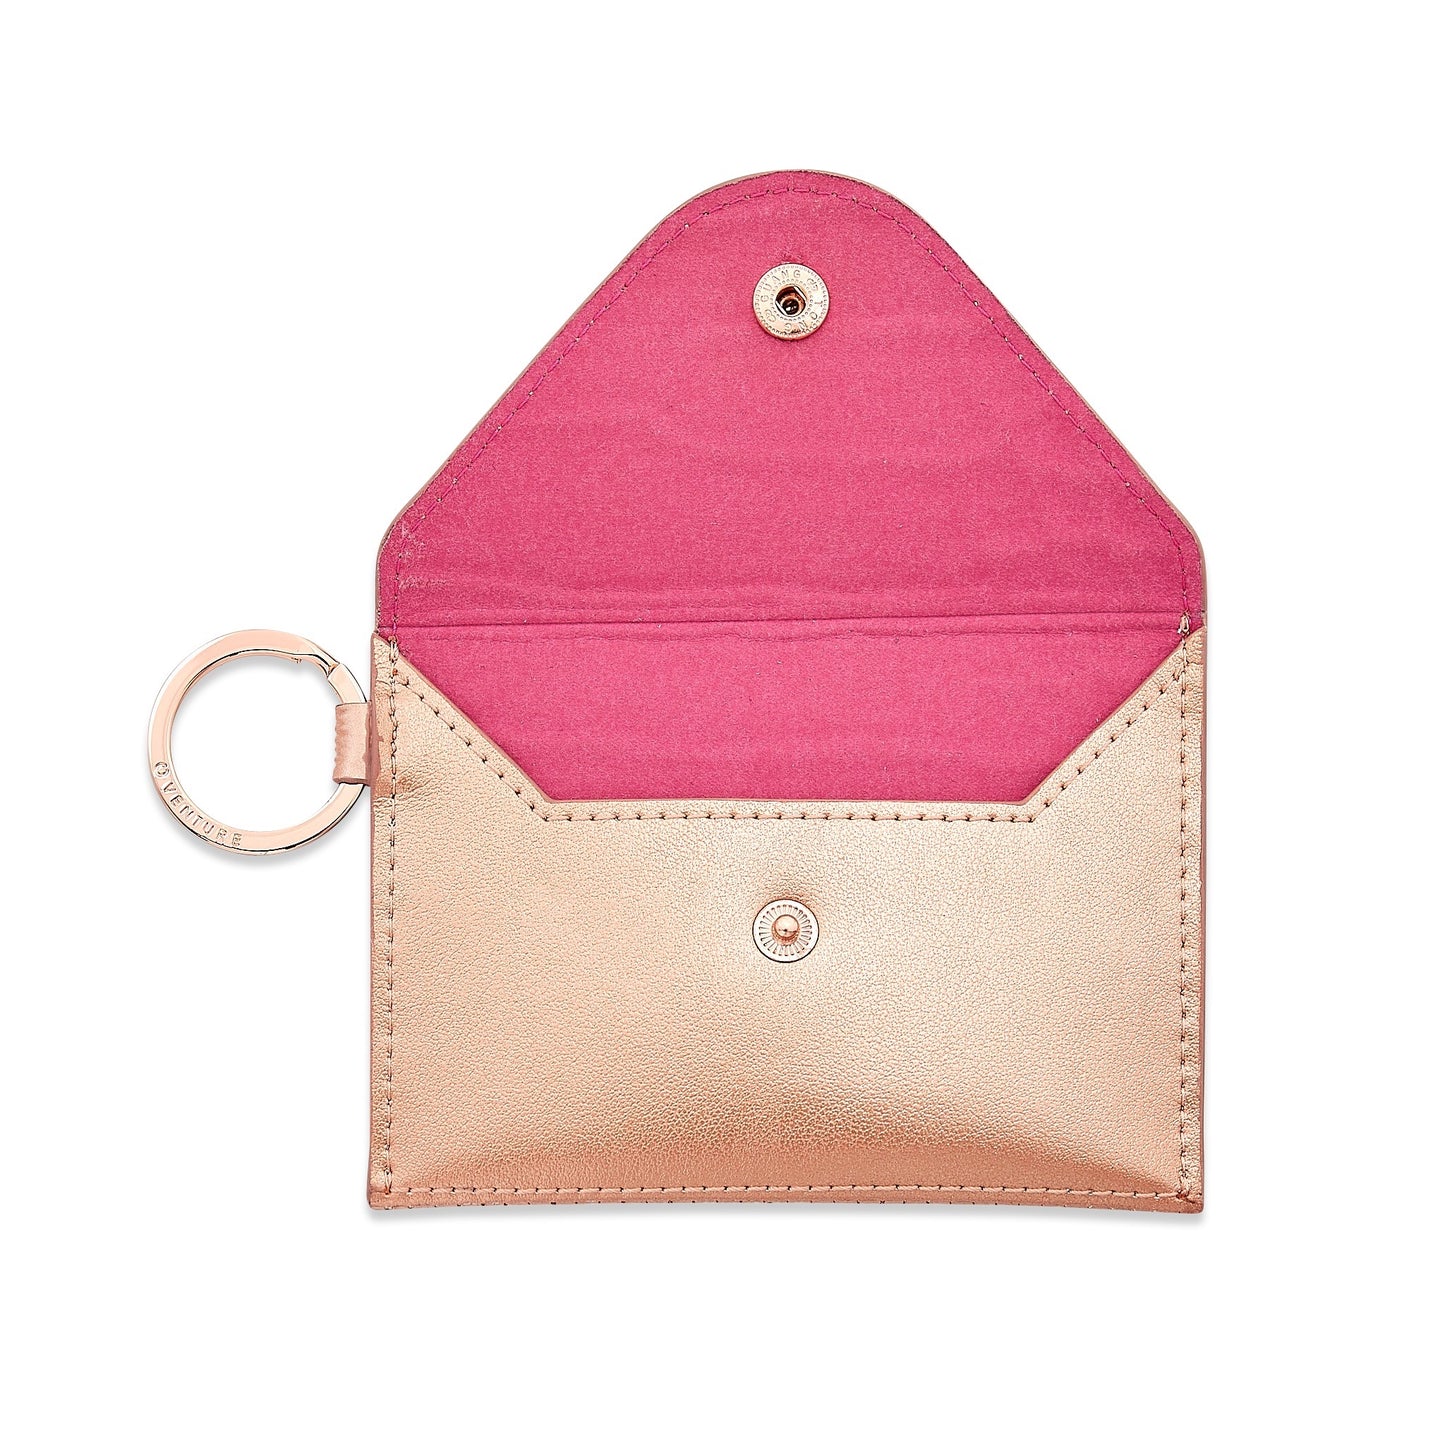 Stylish leather keychain wallet in mini envelope design.  Keyring wallet is shown open with pink liner.